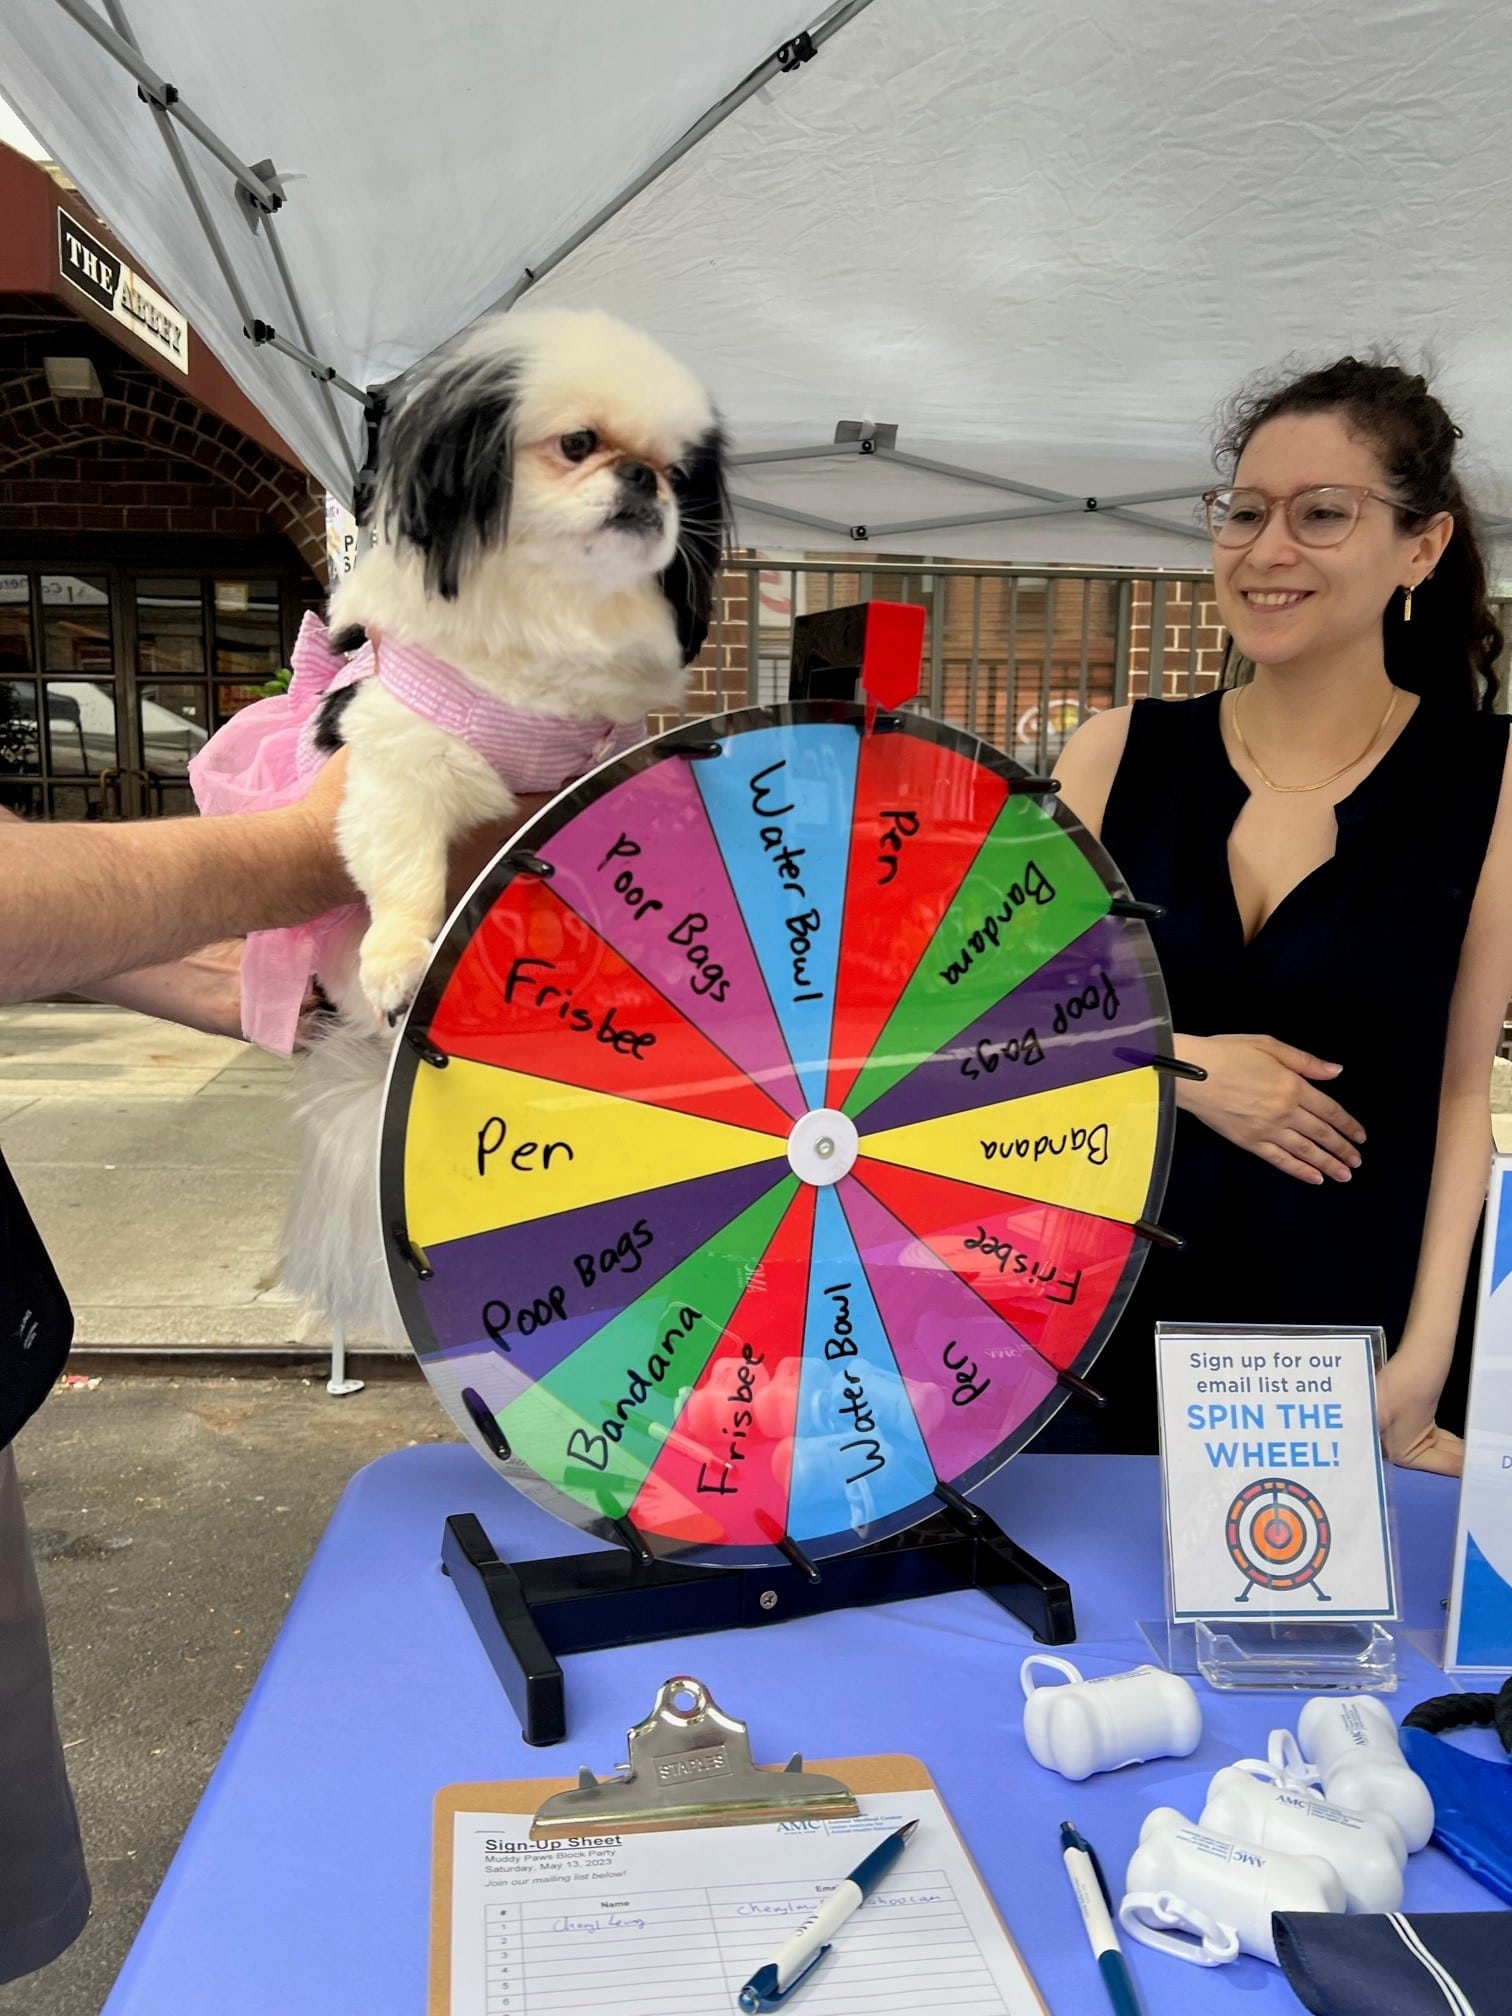 A dog in a pink dress next to the prize wheel on AMC's table at the Muddy Paws Block Party.